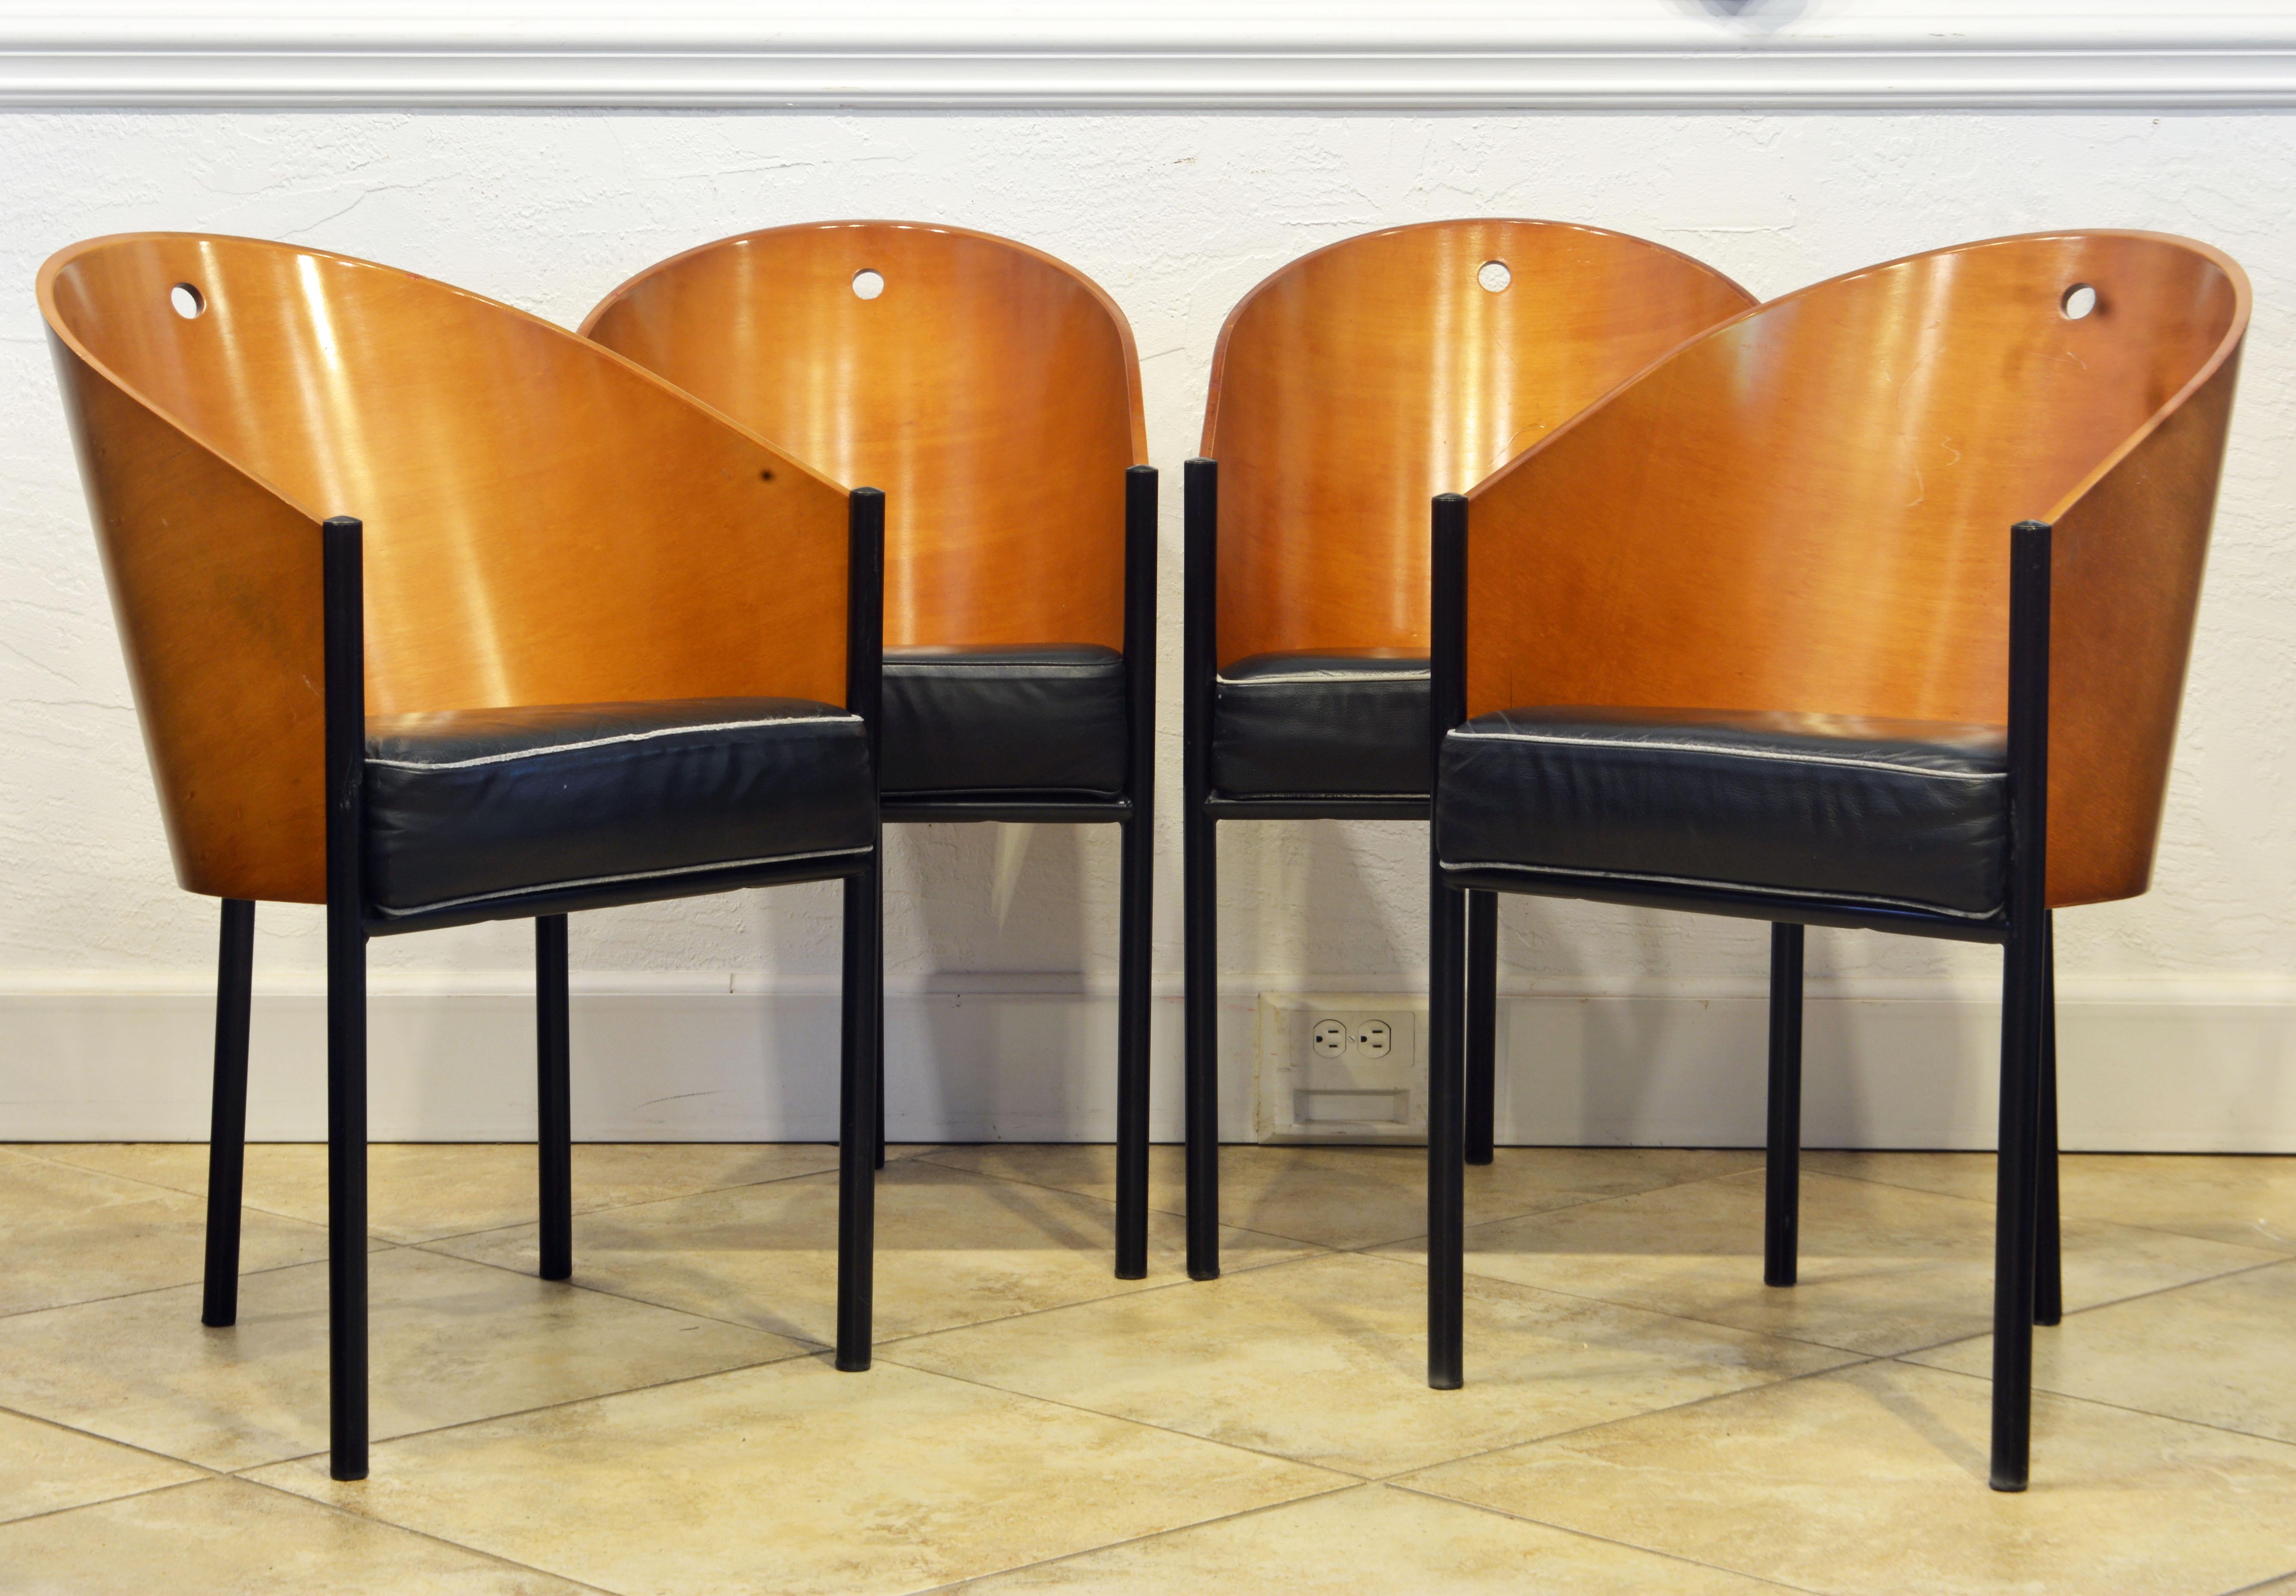 This group of chairs are designed by Philippe Starck for Driade Italy originally for the famed 'Costes Cafe' in Paris. Designed in 1984 they are now universally recognized as modern design icons. They are made with a tubular black metal construction